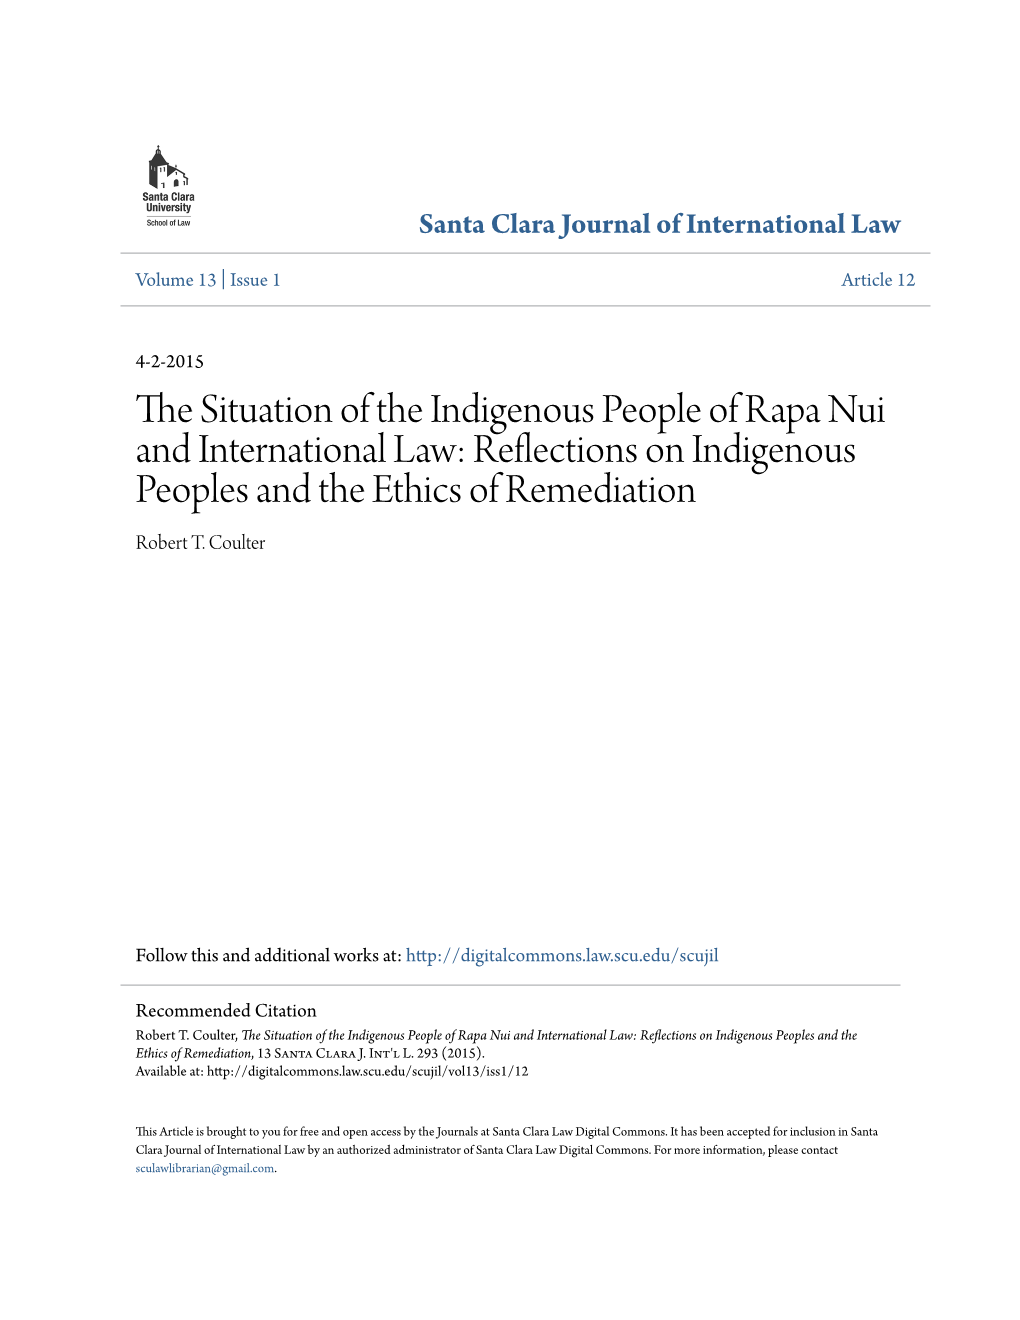 The Situation of the Indigenous People of Rapa Nui and International Law: Reflections on Indigenous Peoples and the Ethics of Remediation, 13 Santa Clara J